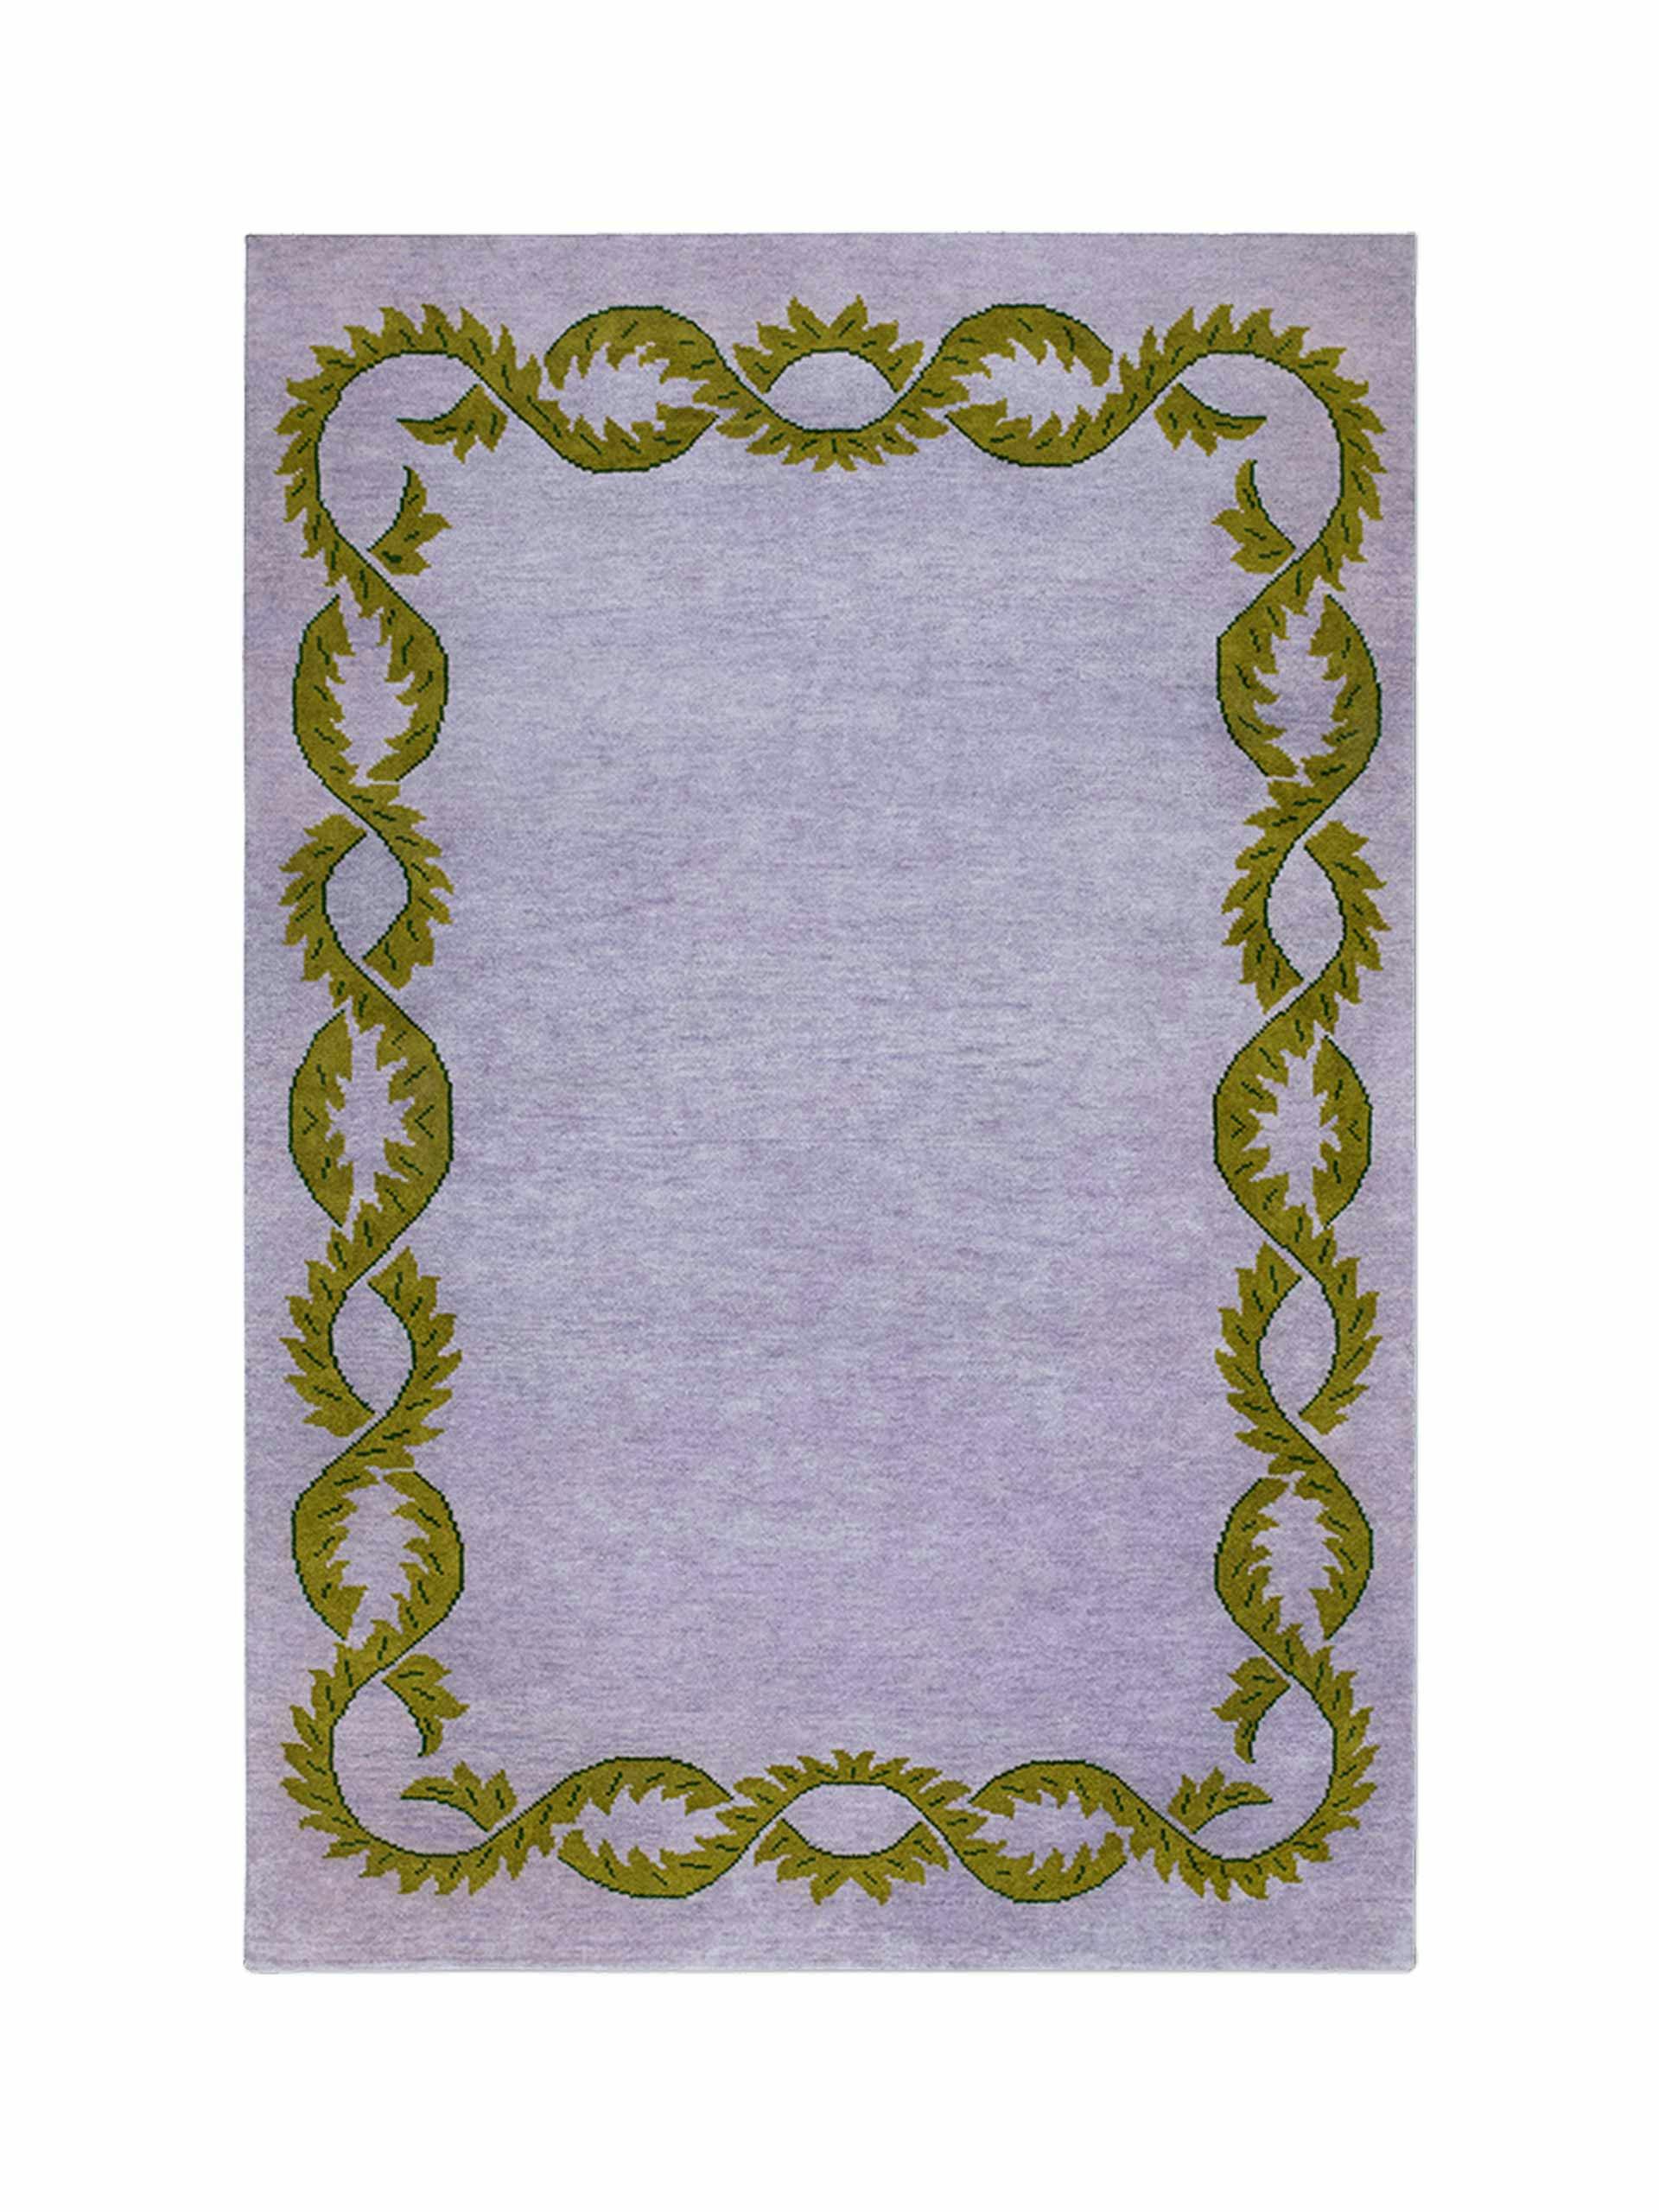 Lilac rug with climbing vines pattern